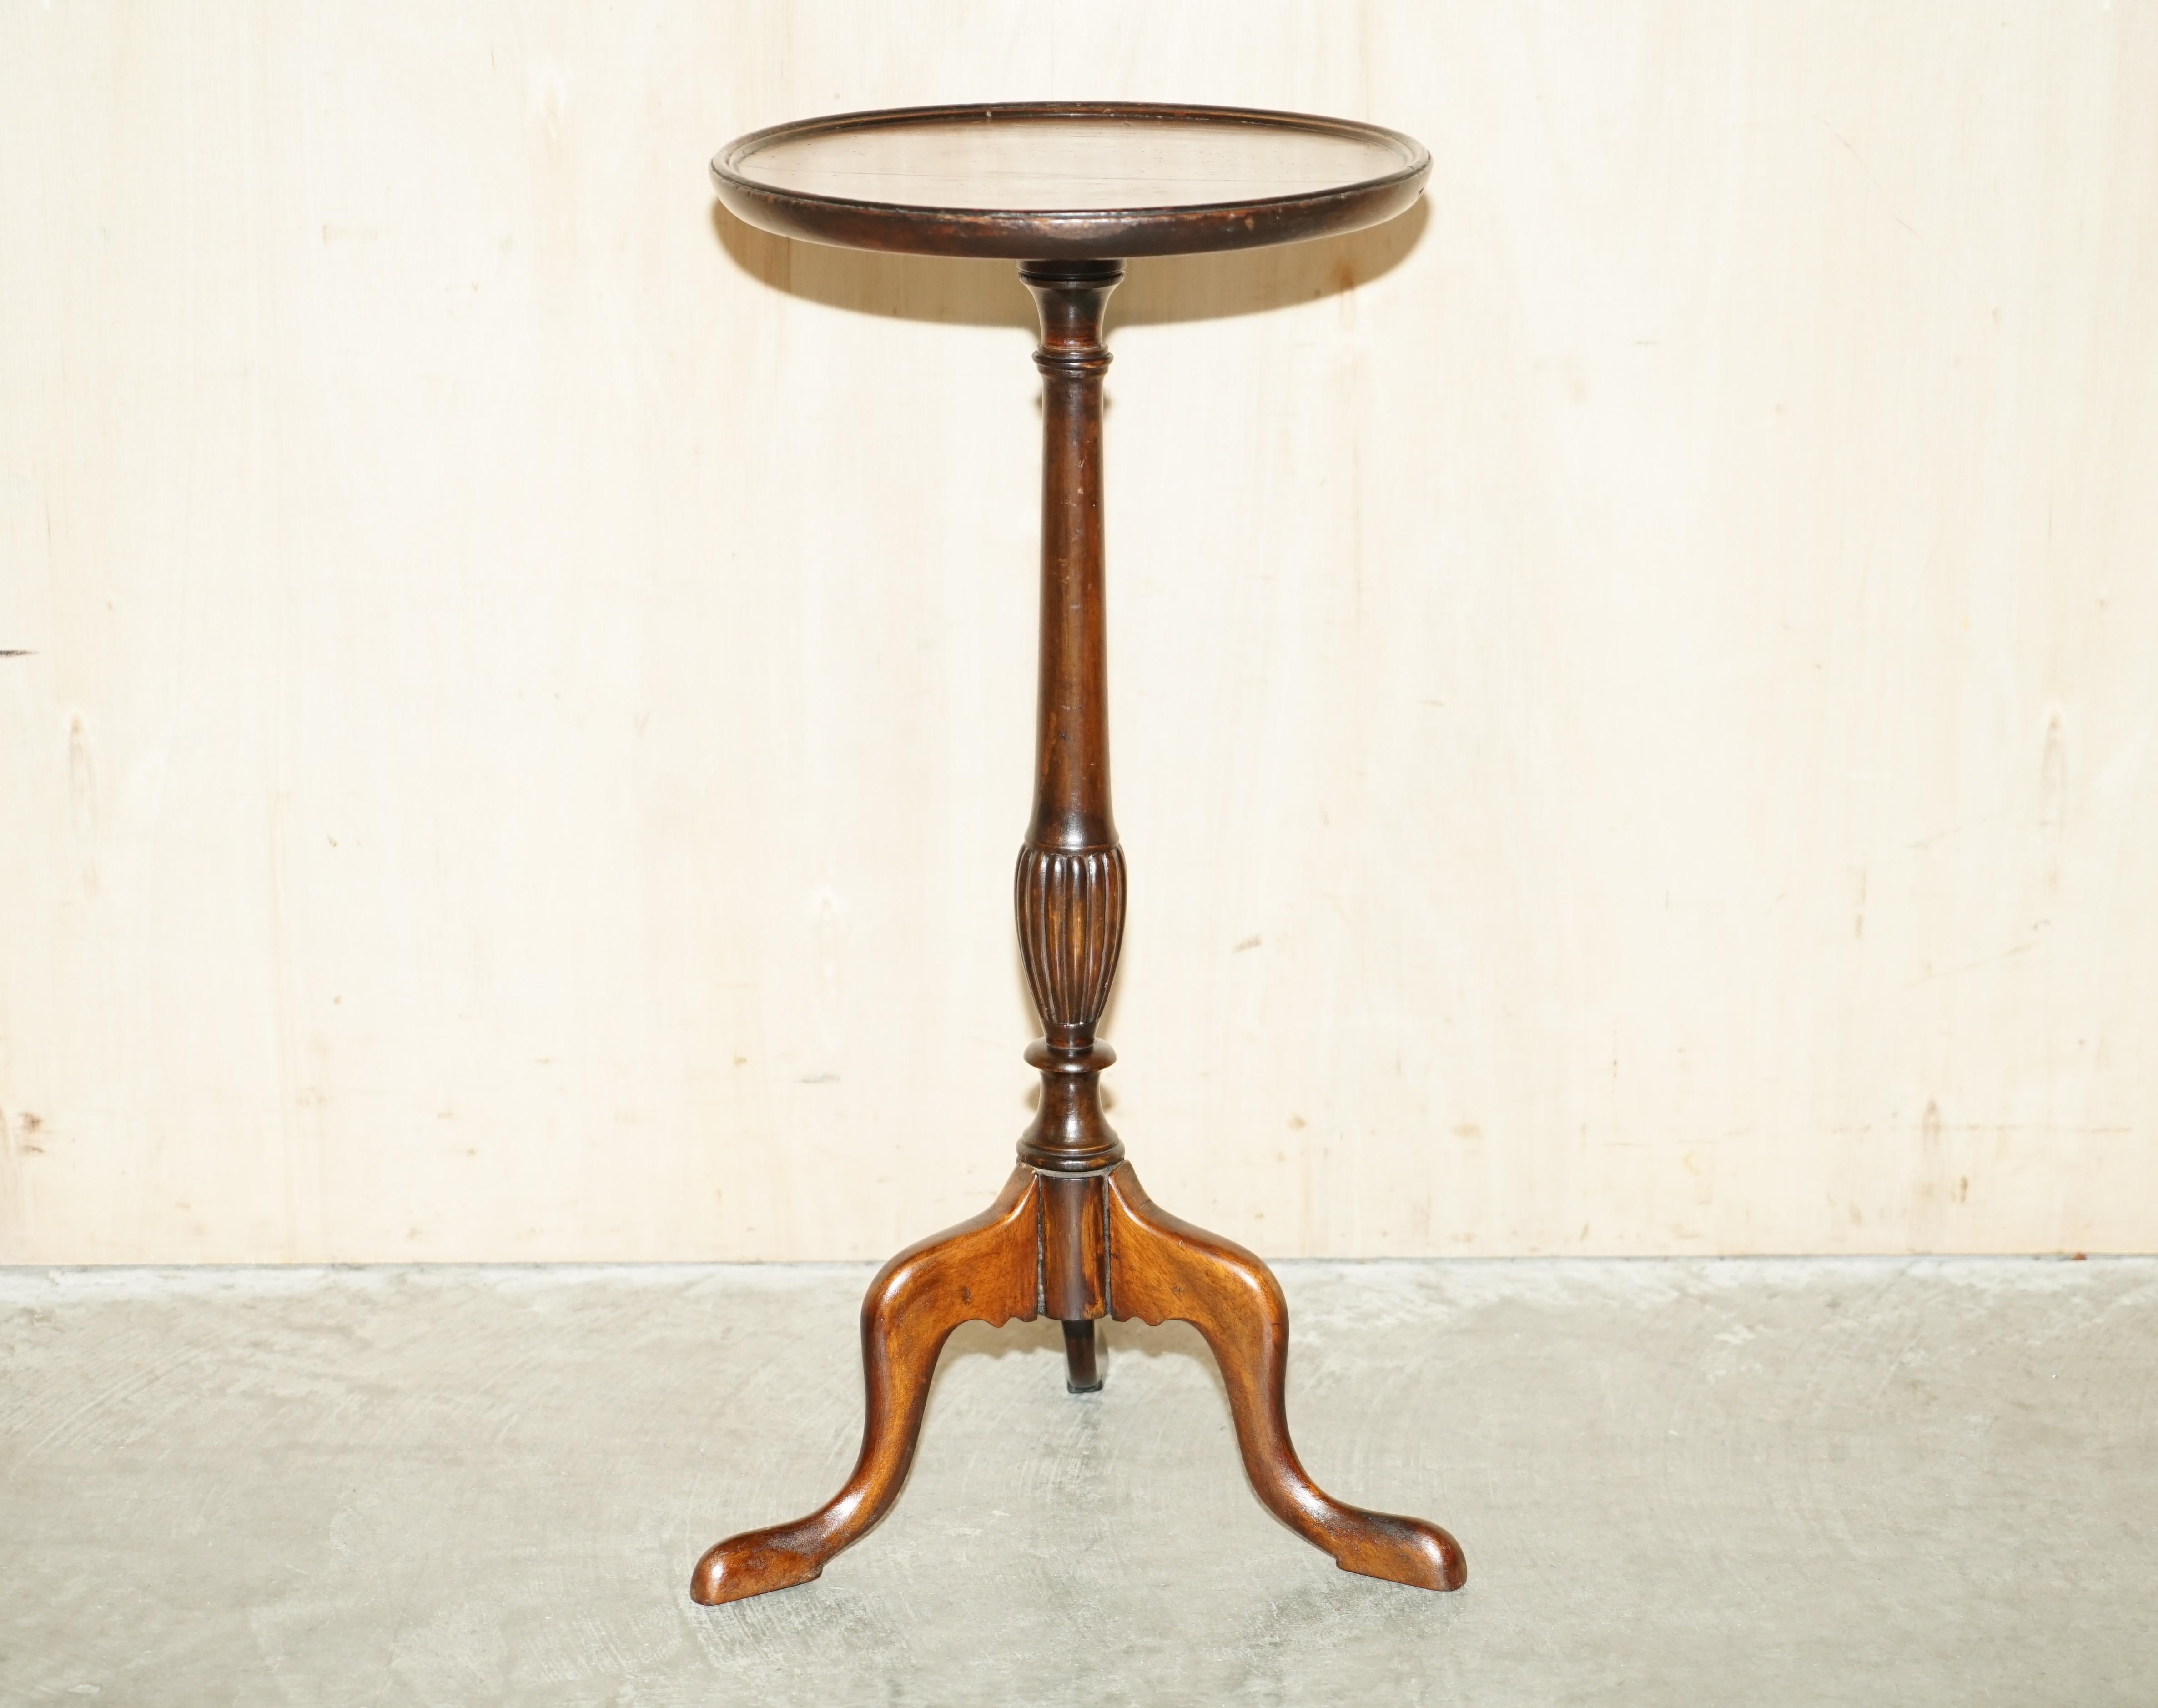 We are delighted to offer for sale this lovely original finish, antique Mahogany lamp or side table with a nicely turned column base Circa 1880

A good-looking well-made tripod table in good condition throughout, we have cleaned waxed and polished